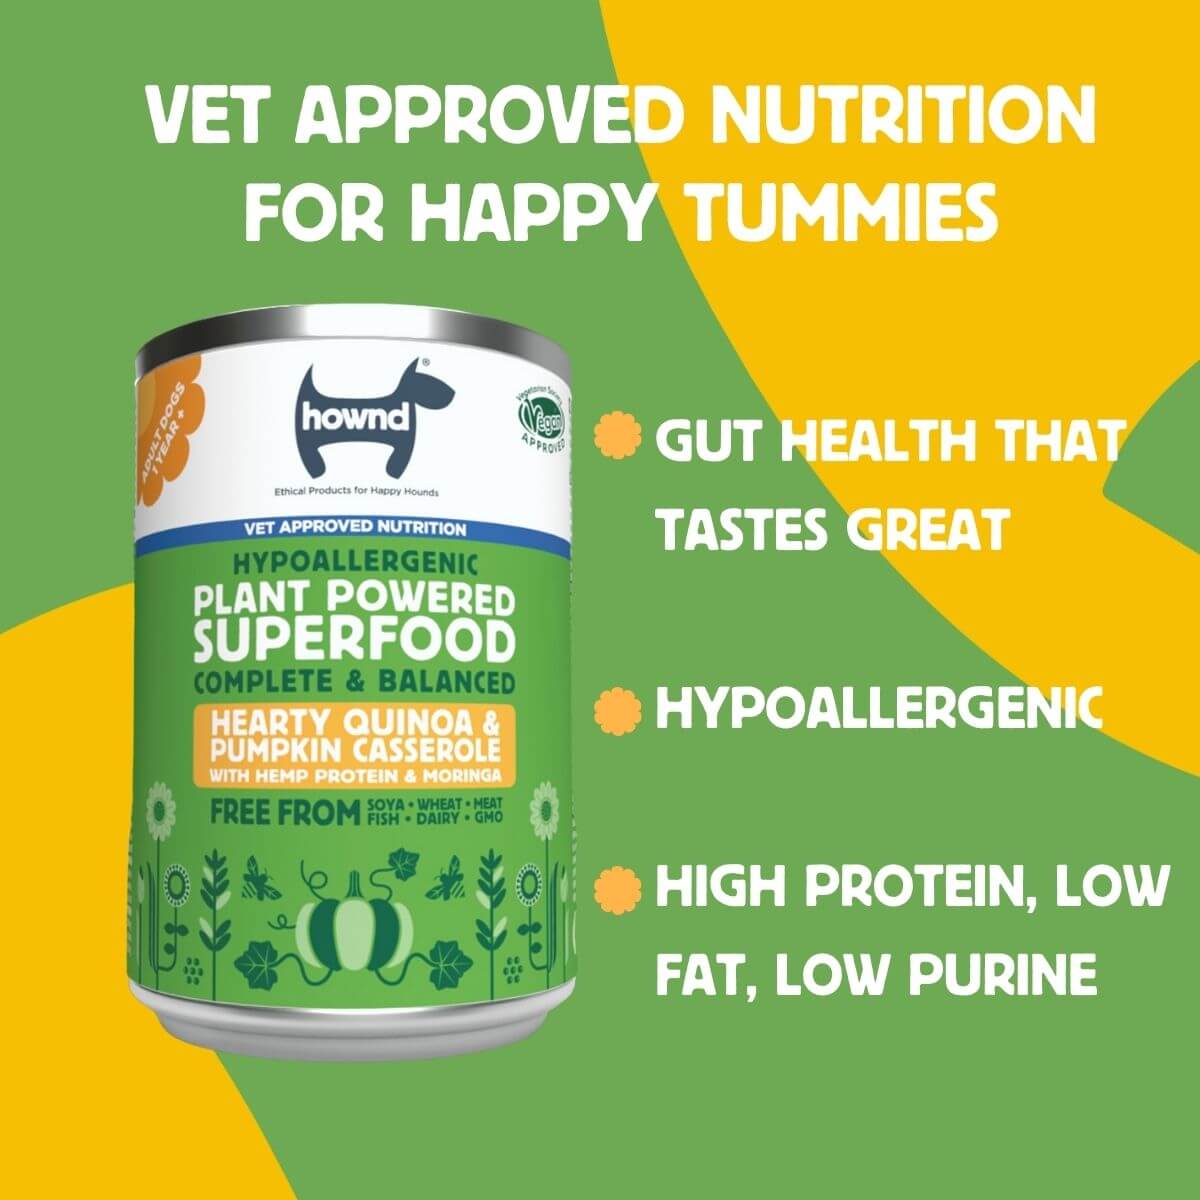 quinoa superfood_vet approved high protein, low fat